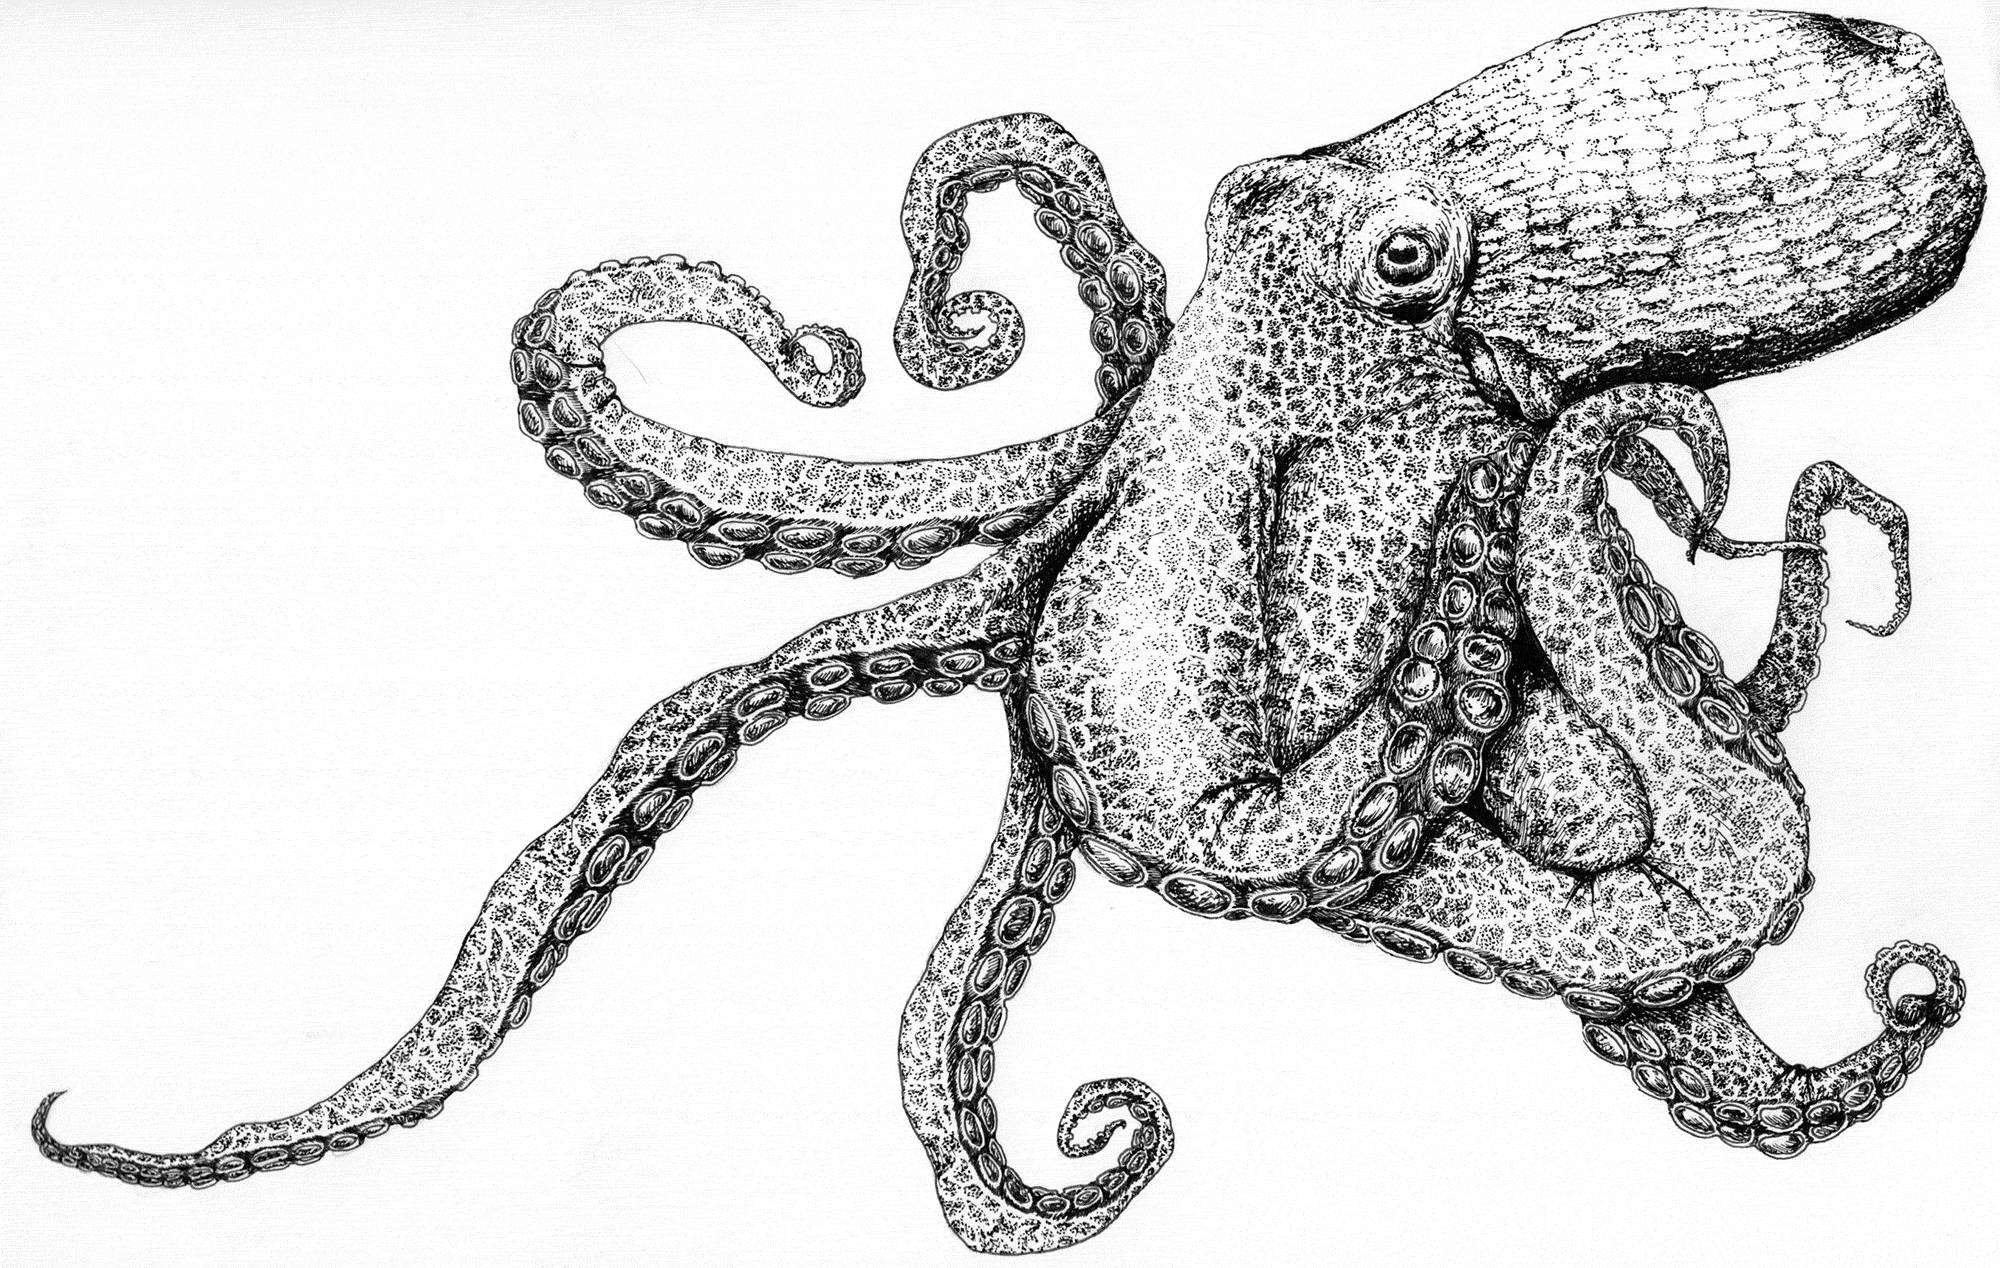 Giant Pacific Octopus – Illustrating Nature 2021